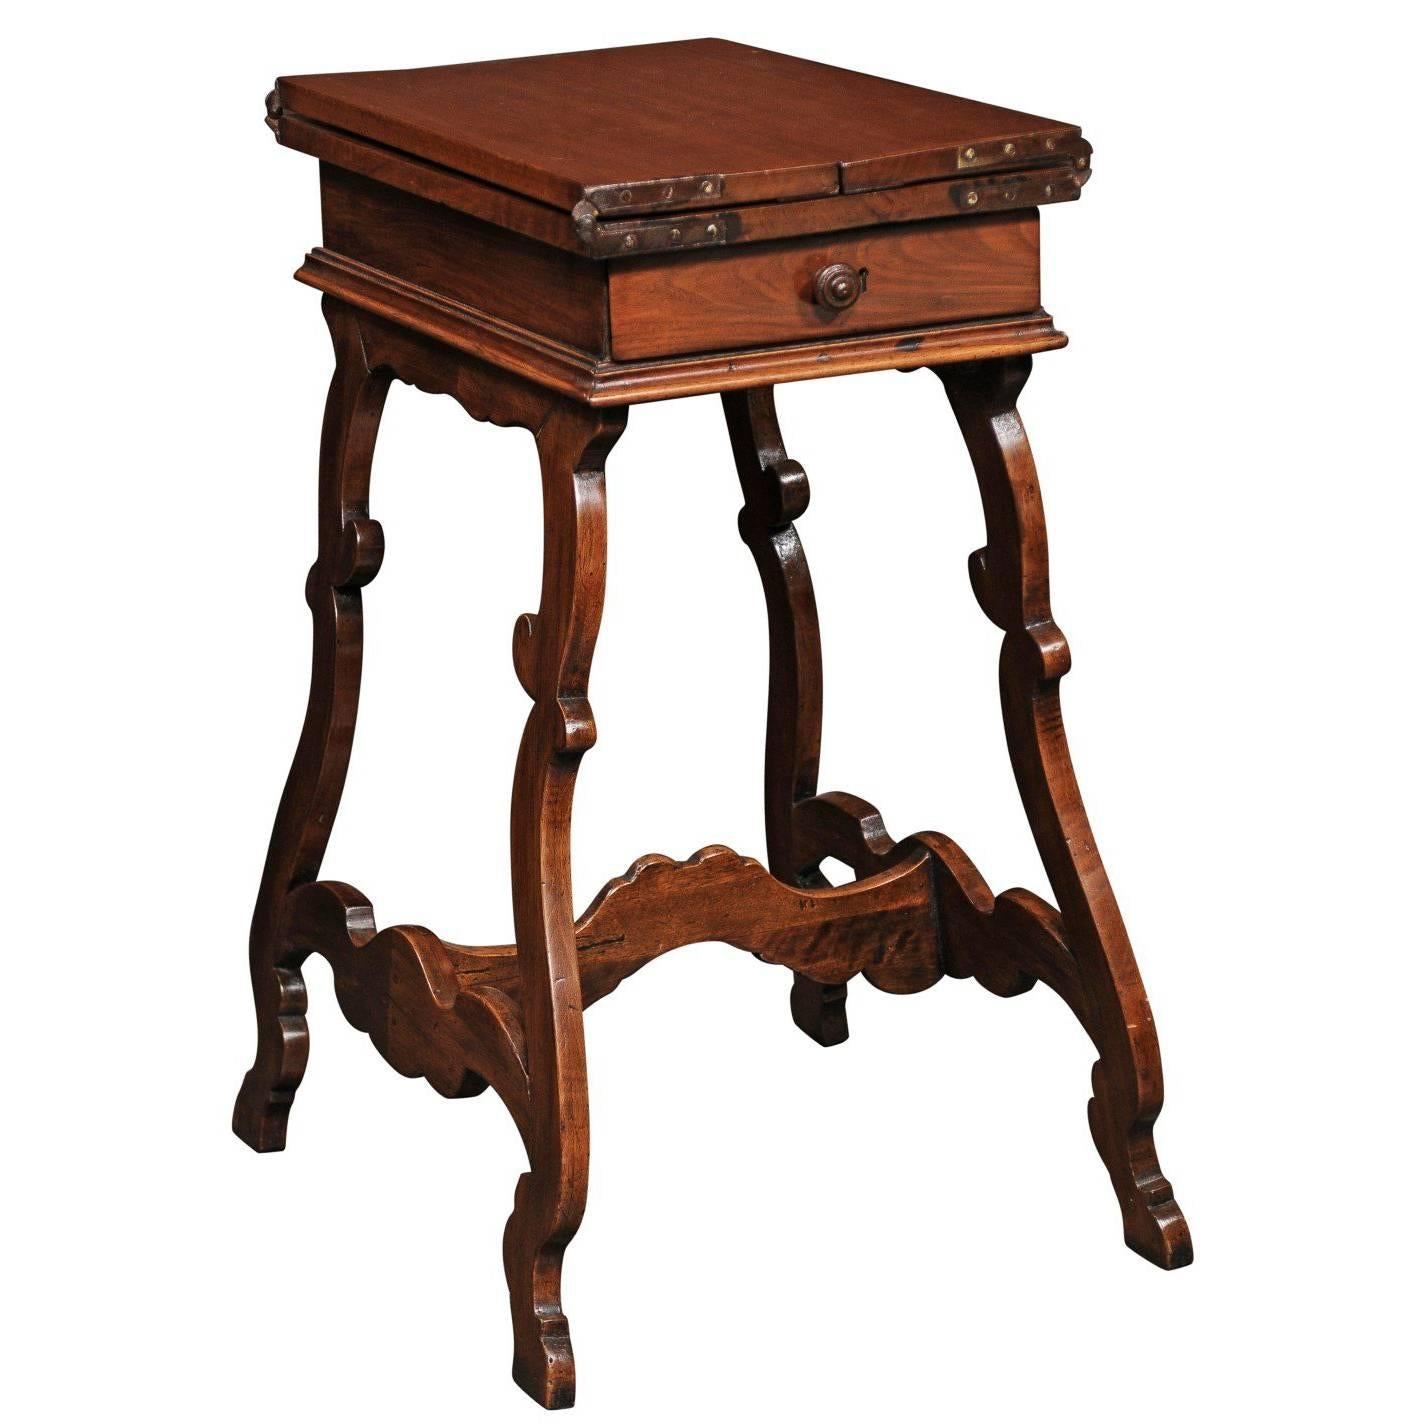 Italian 1820 Walnut Side Table with Folding Top and Baroque Lyre Shaped Legs